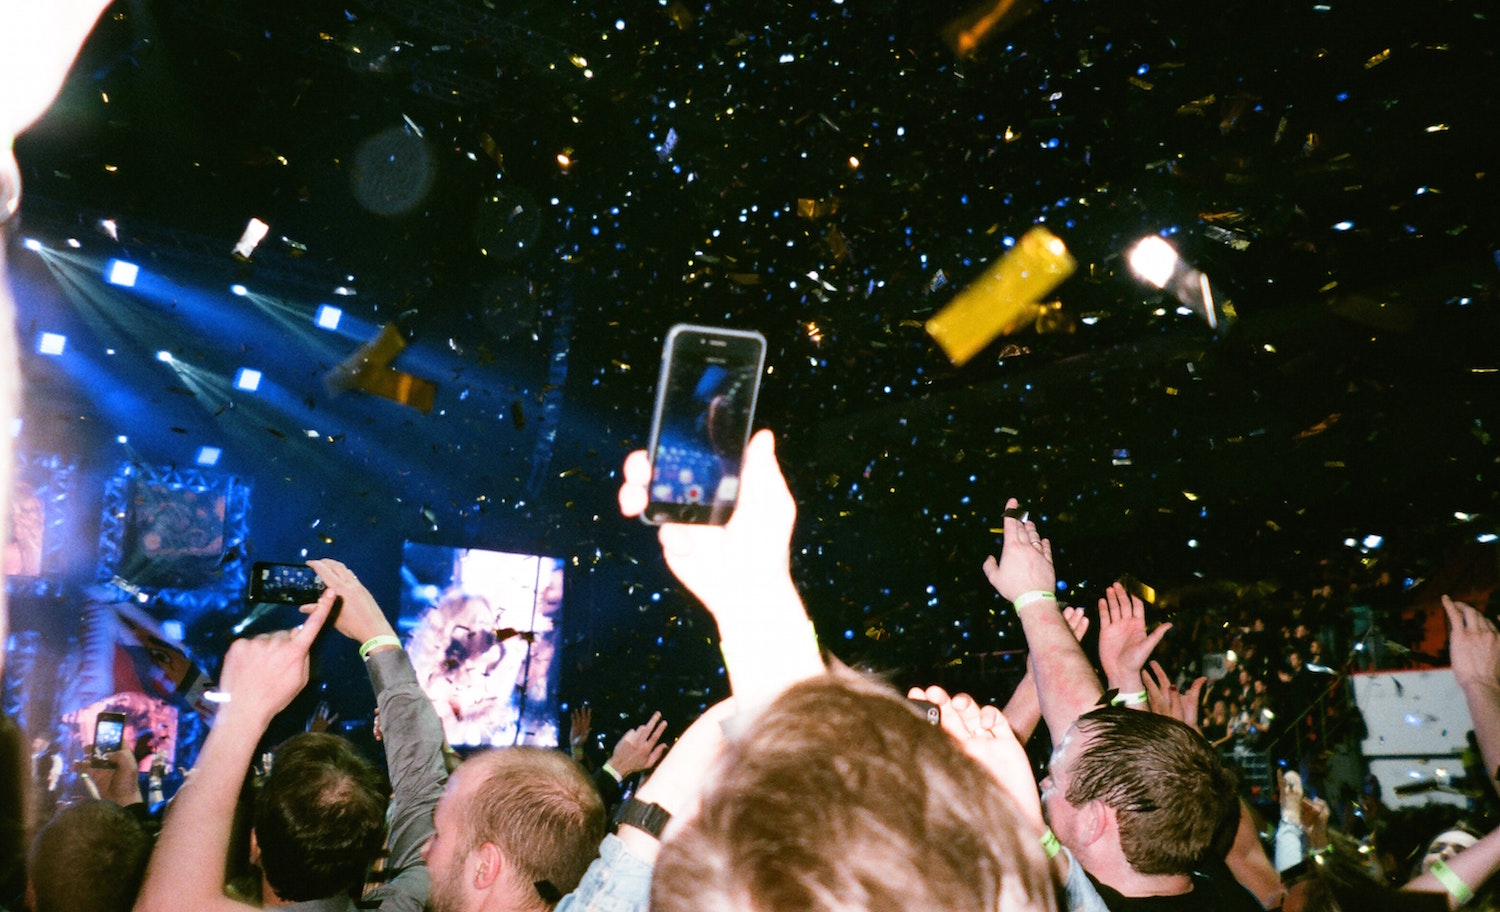 Study: 73% of Aussies support mobile phone bans at gigs